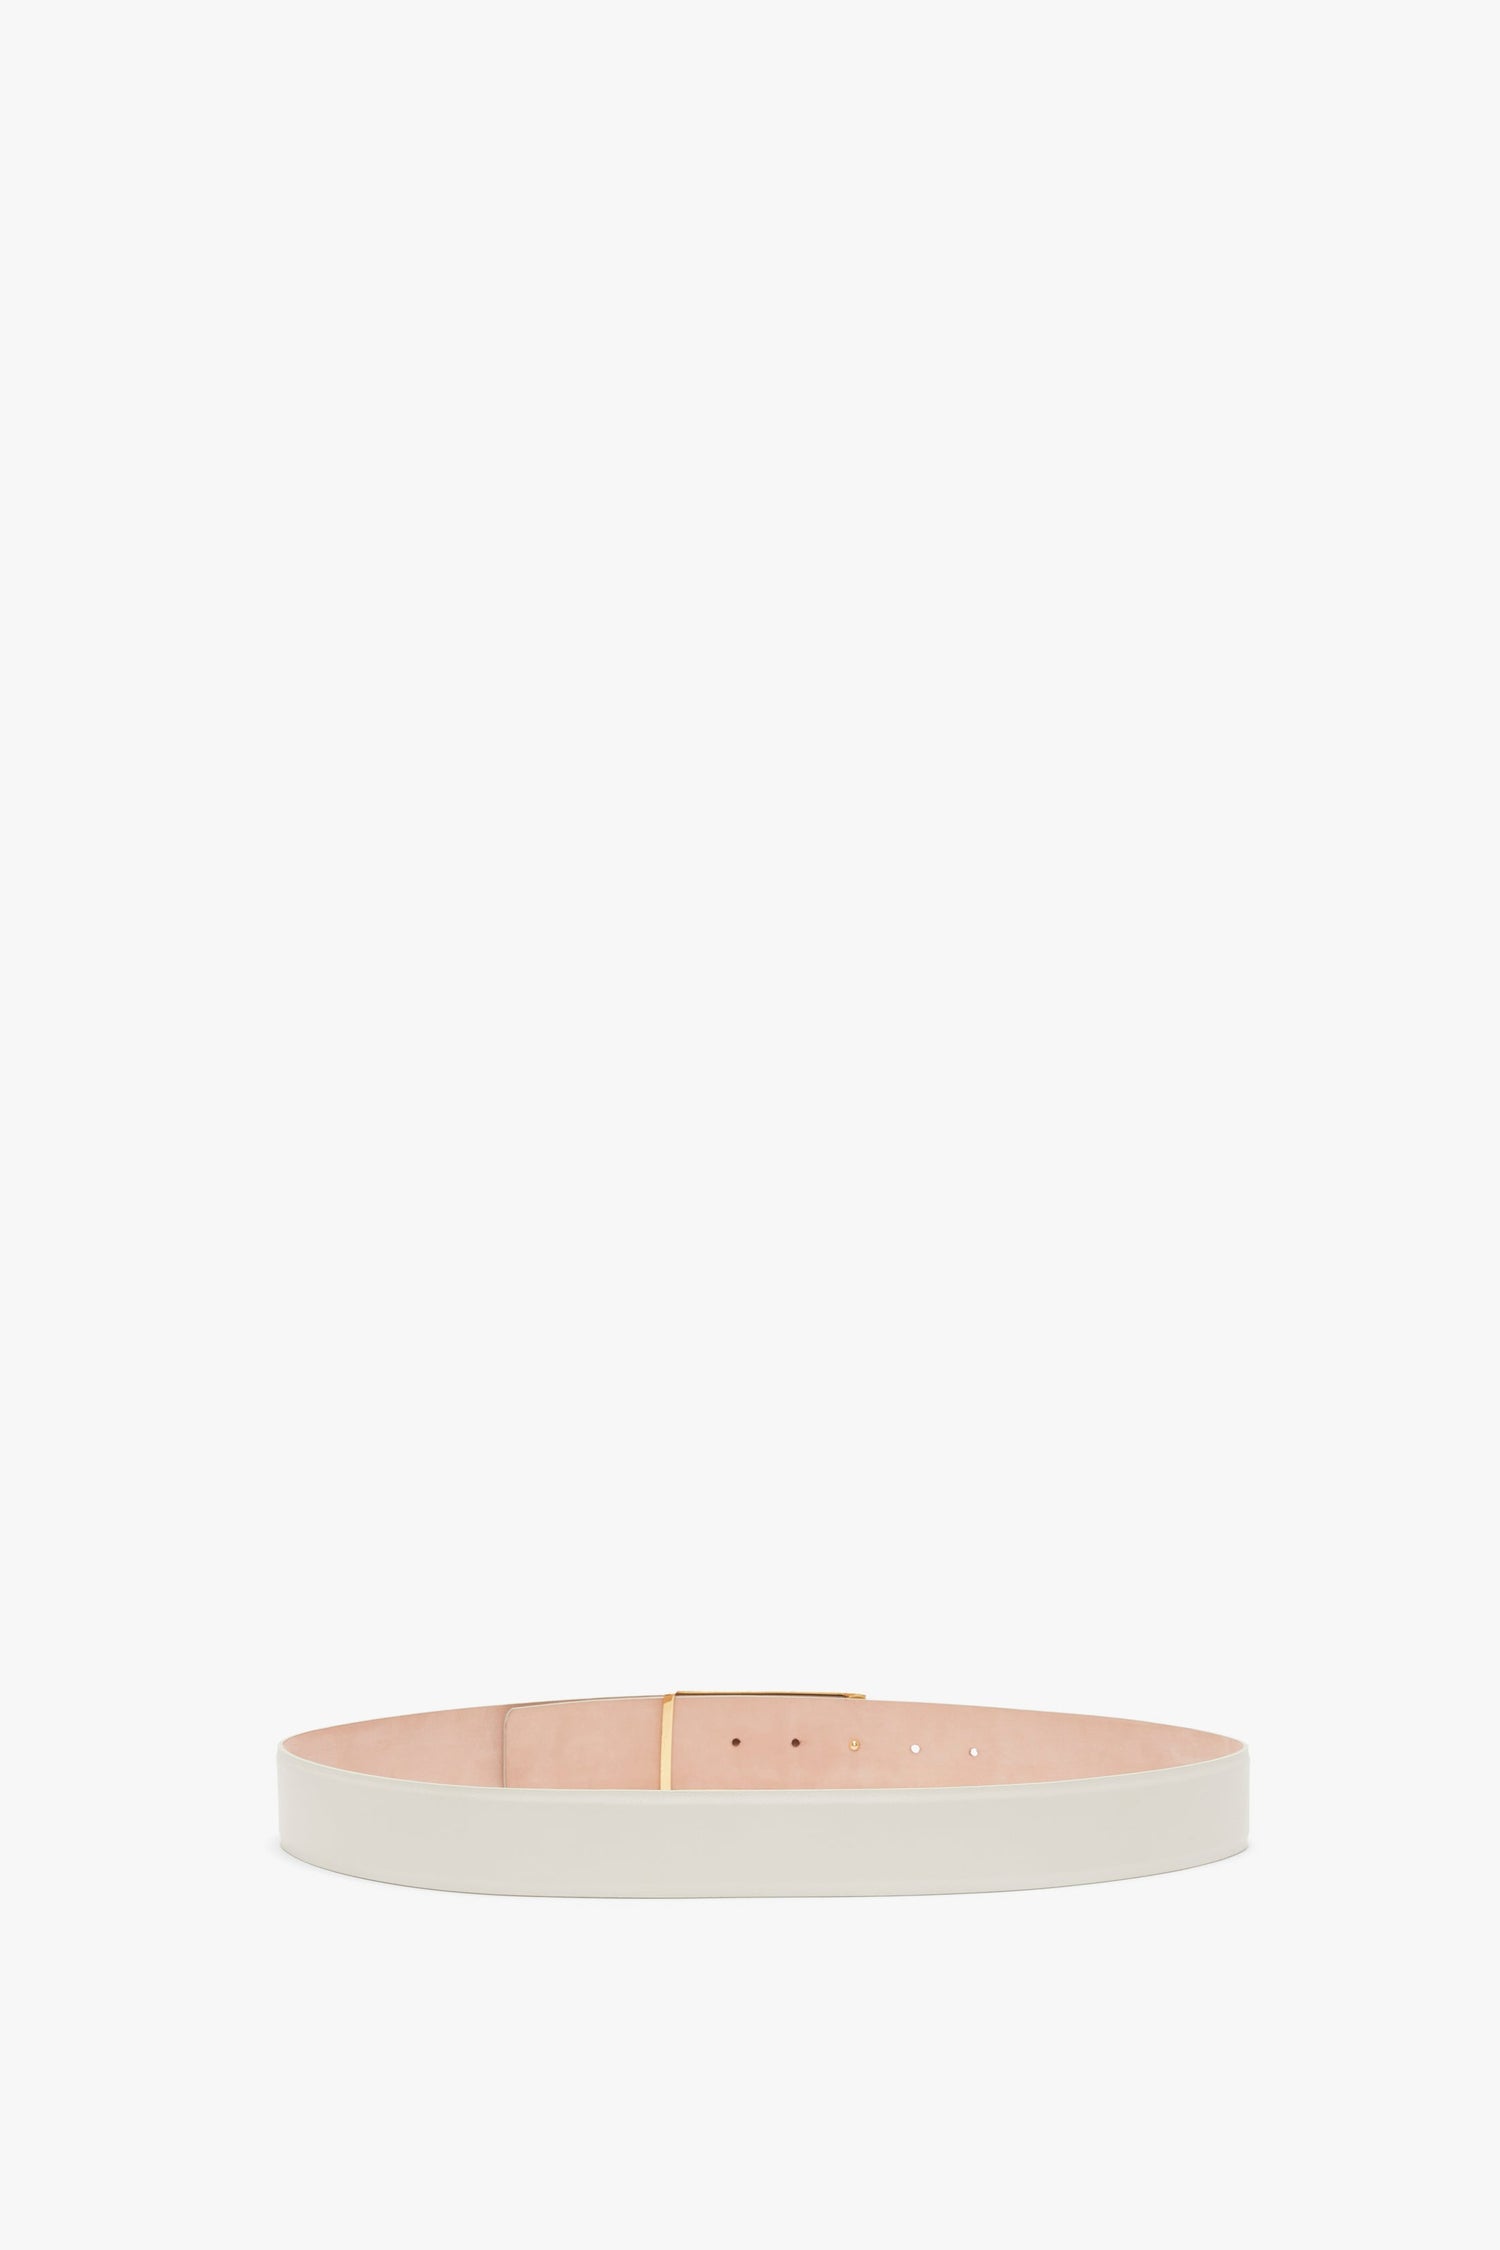 A Victoria Beckham Jumbo Frame Belt In Latte Leather made of pristine white calf leather with elegant gold hardware is displayed in a circular position on a white background.